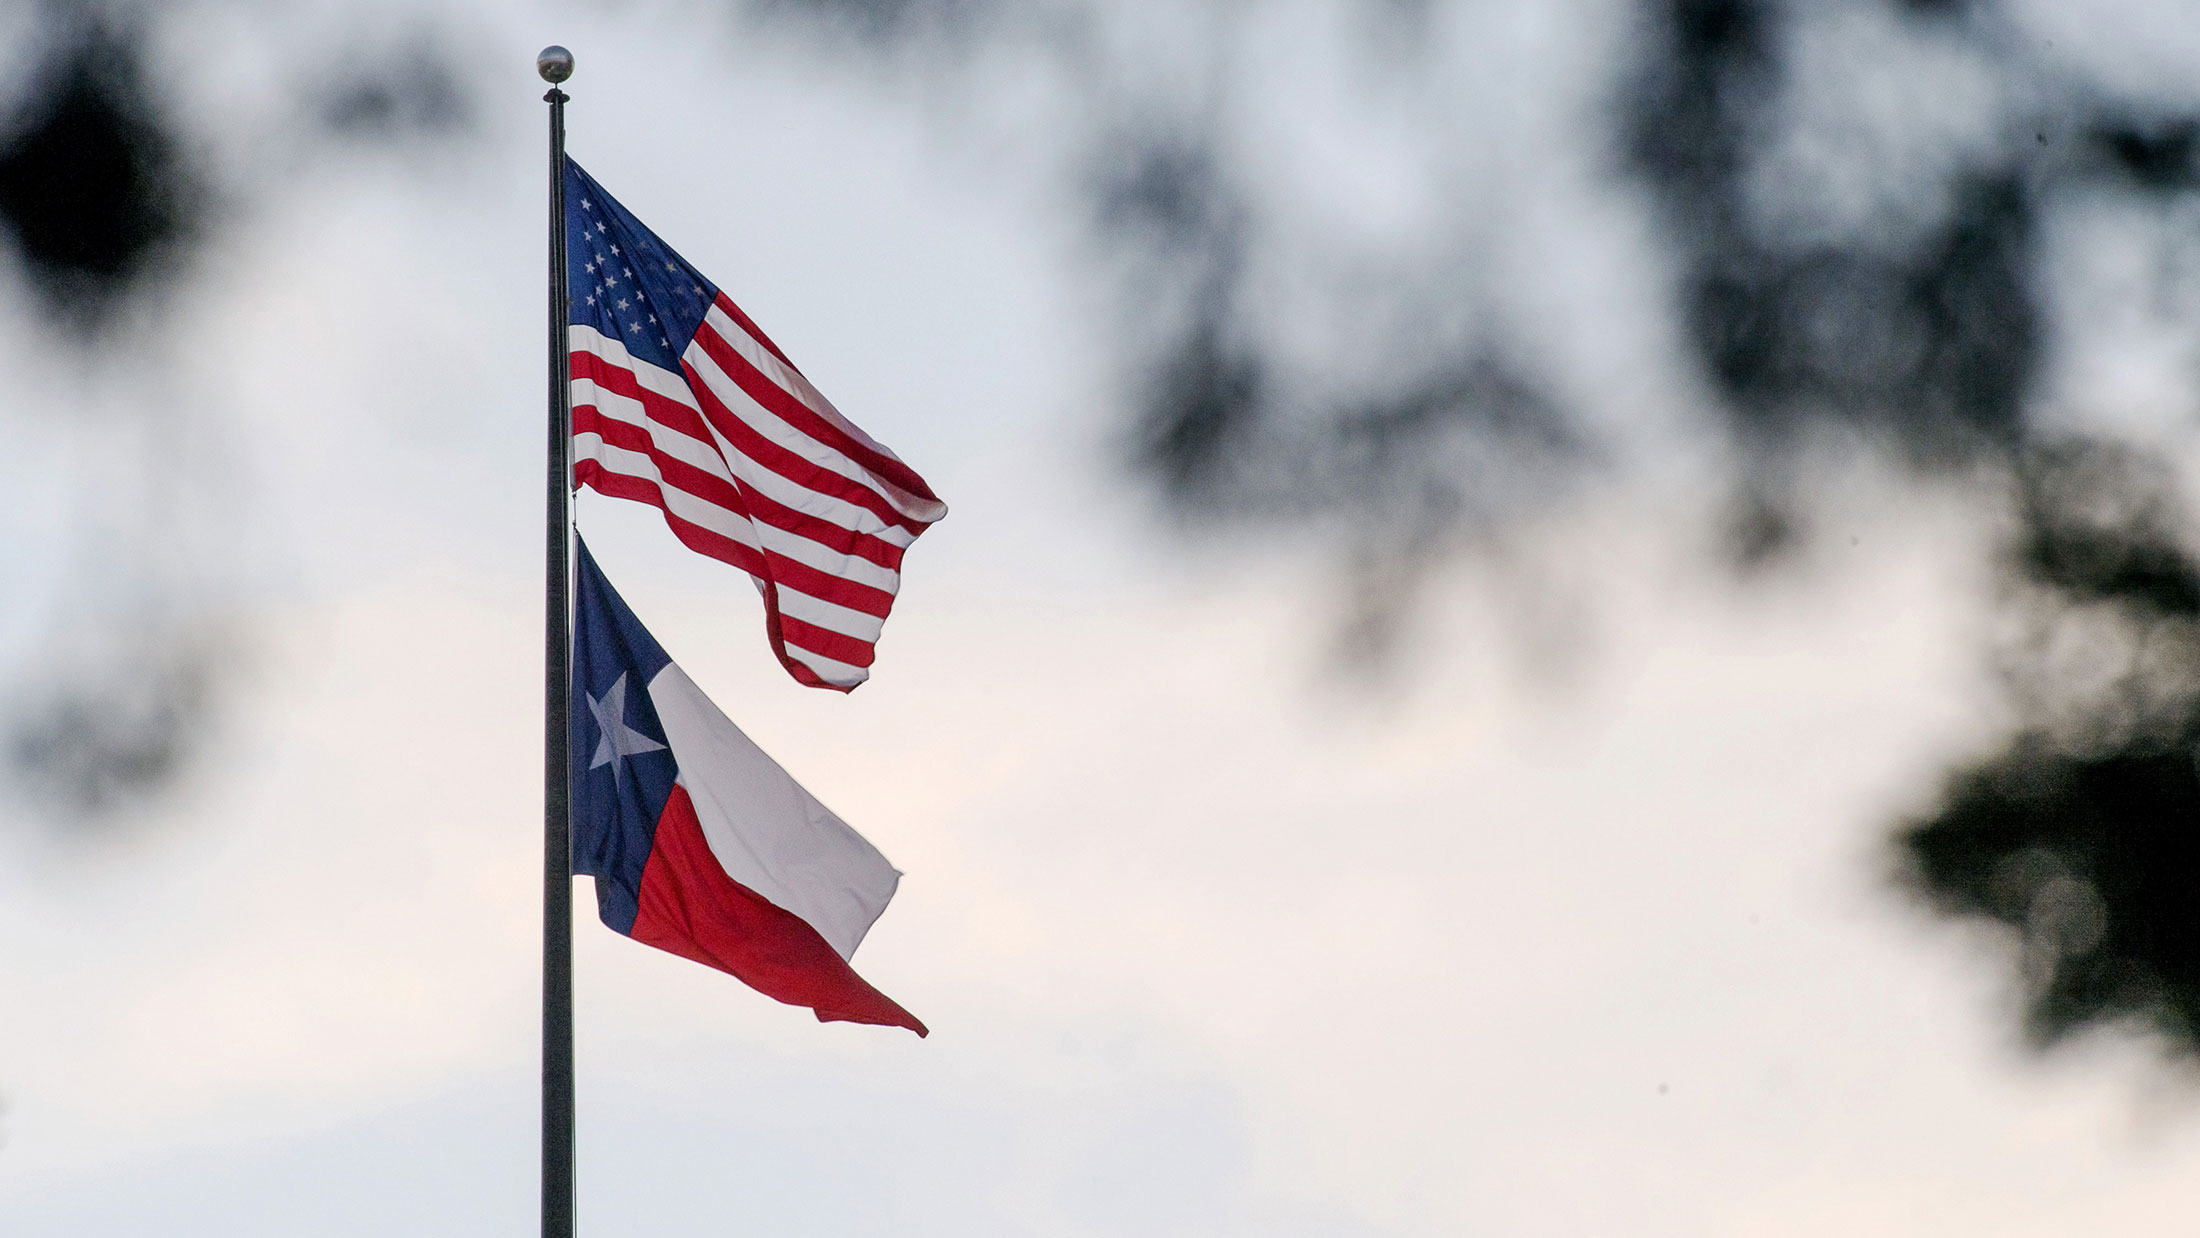 An American flag flies with the Texas state flag outside the Texas State Capitol building in Austin on March 14, 2017.
